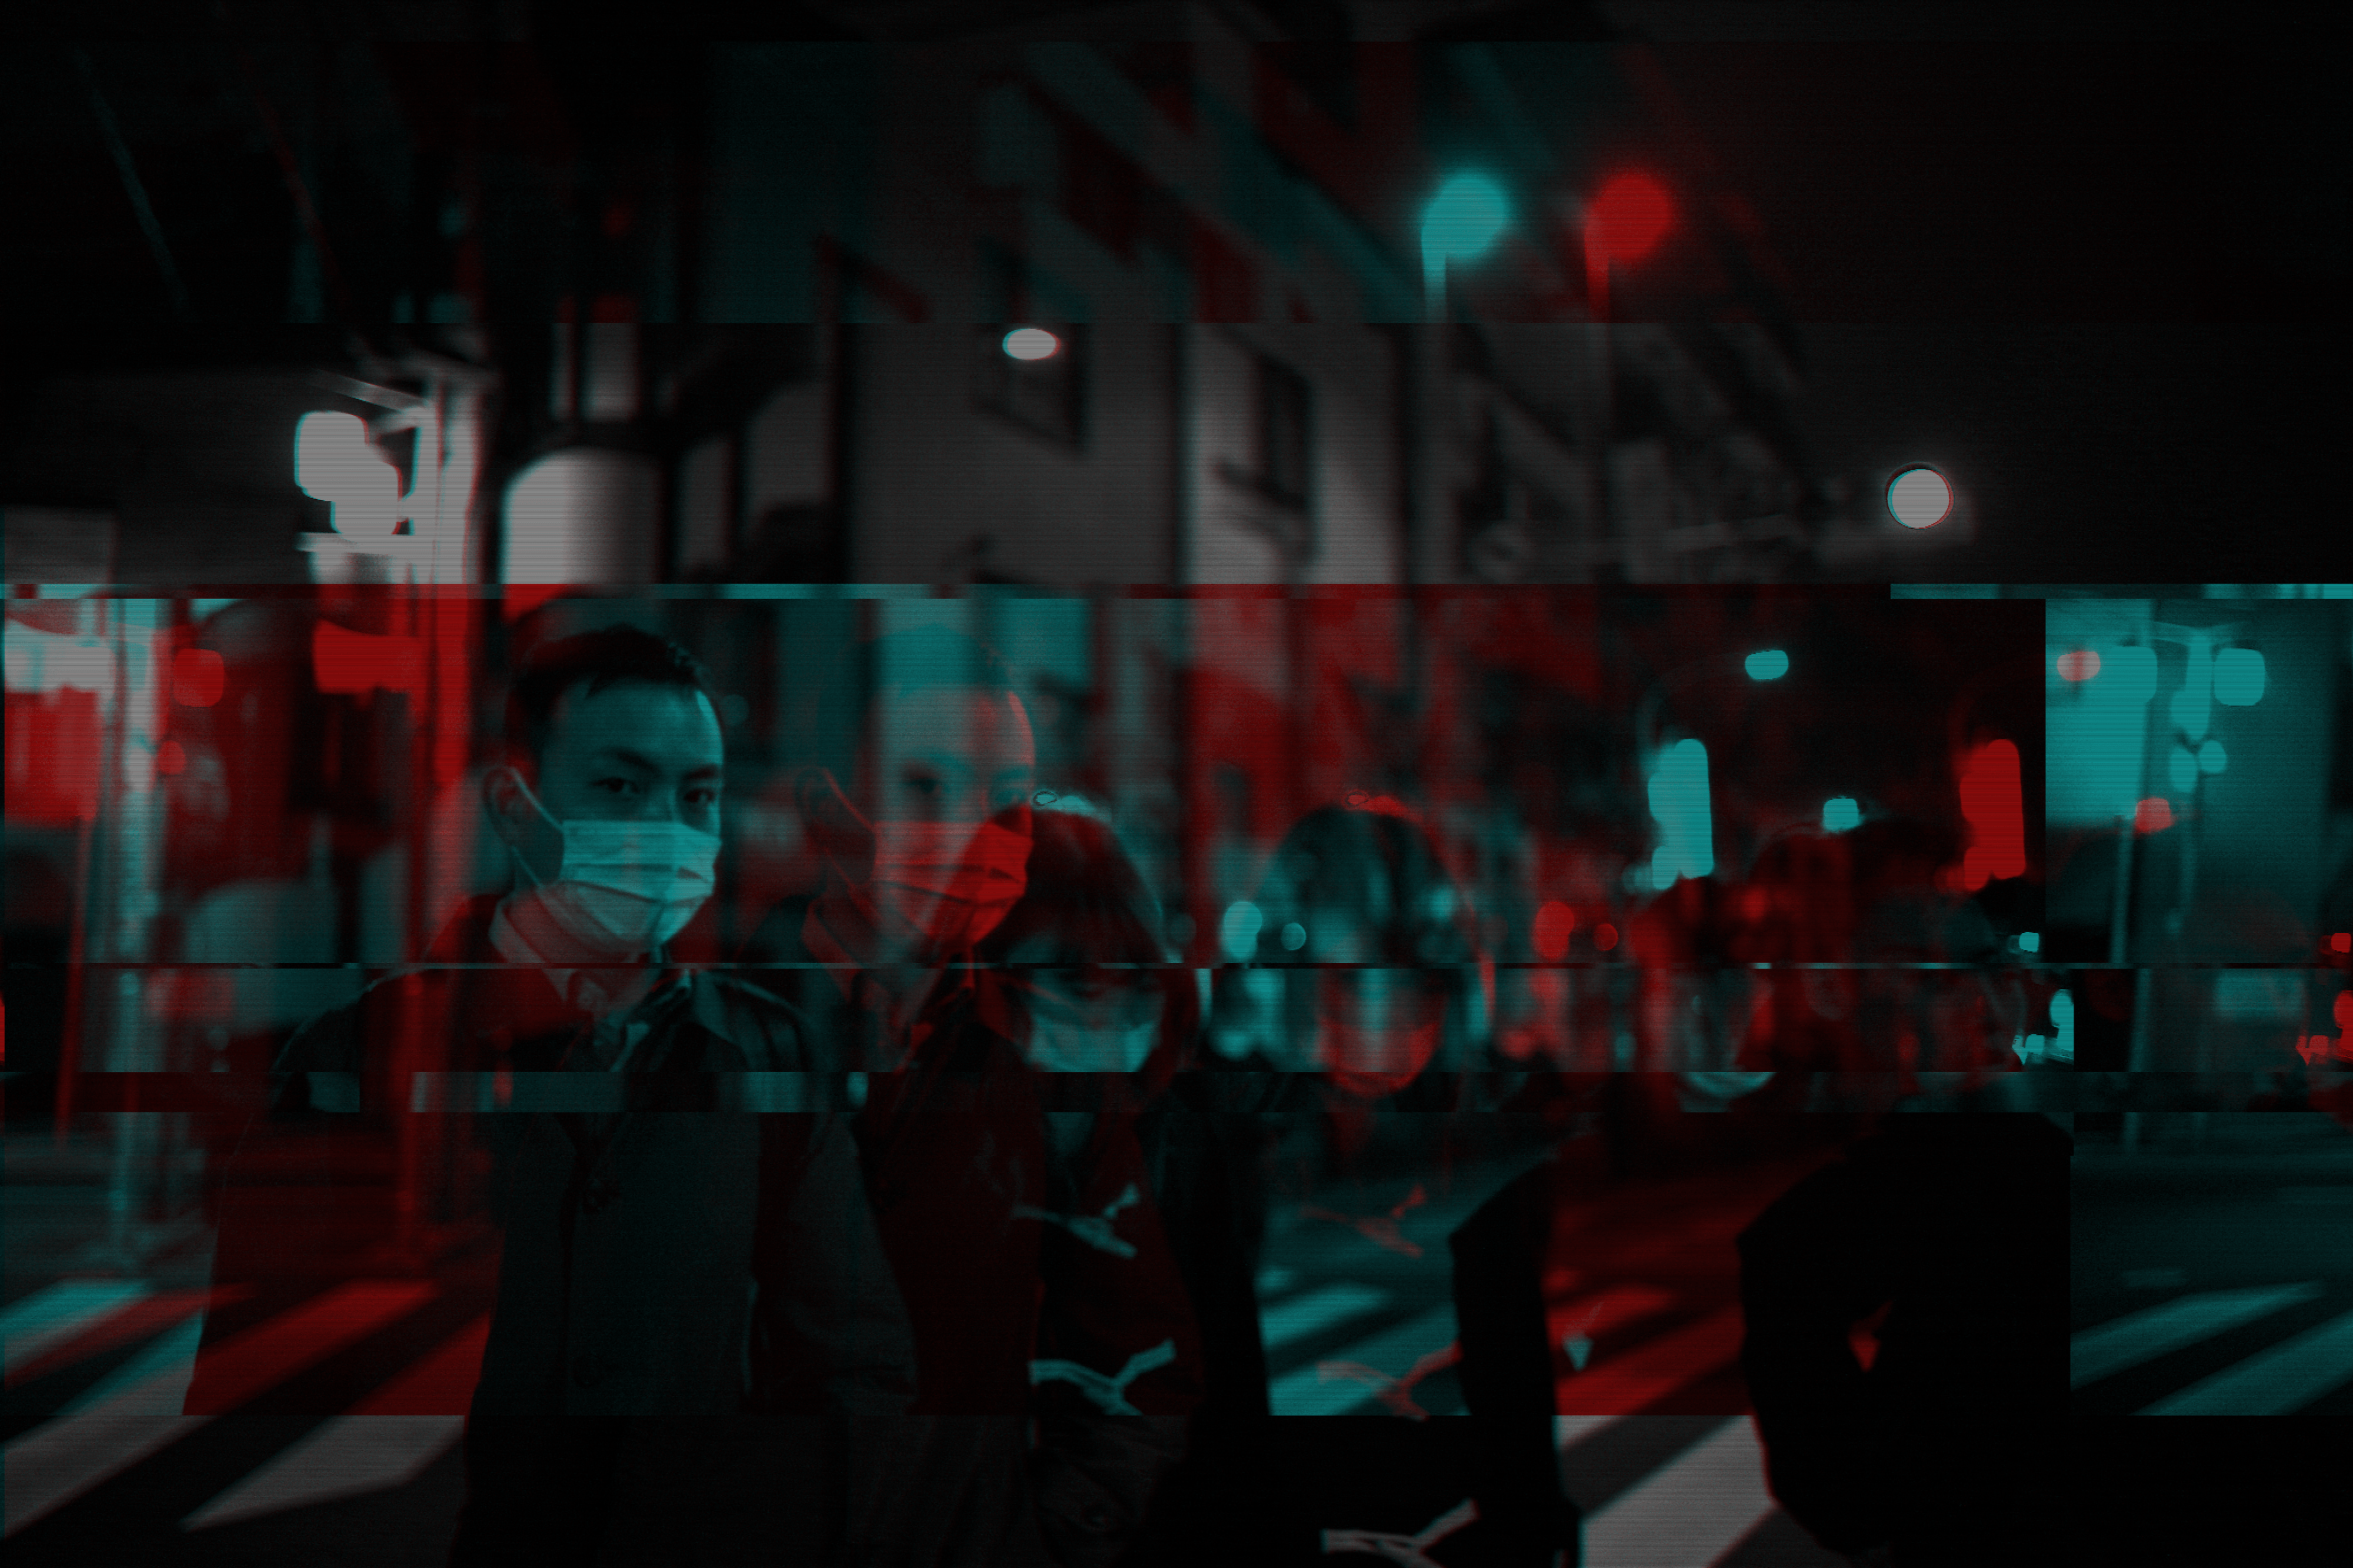 Glitched People, Tokyo, February 2020